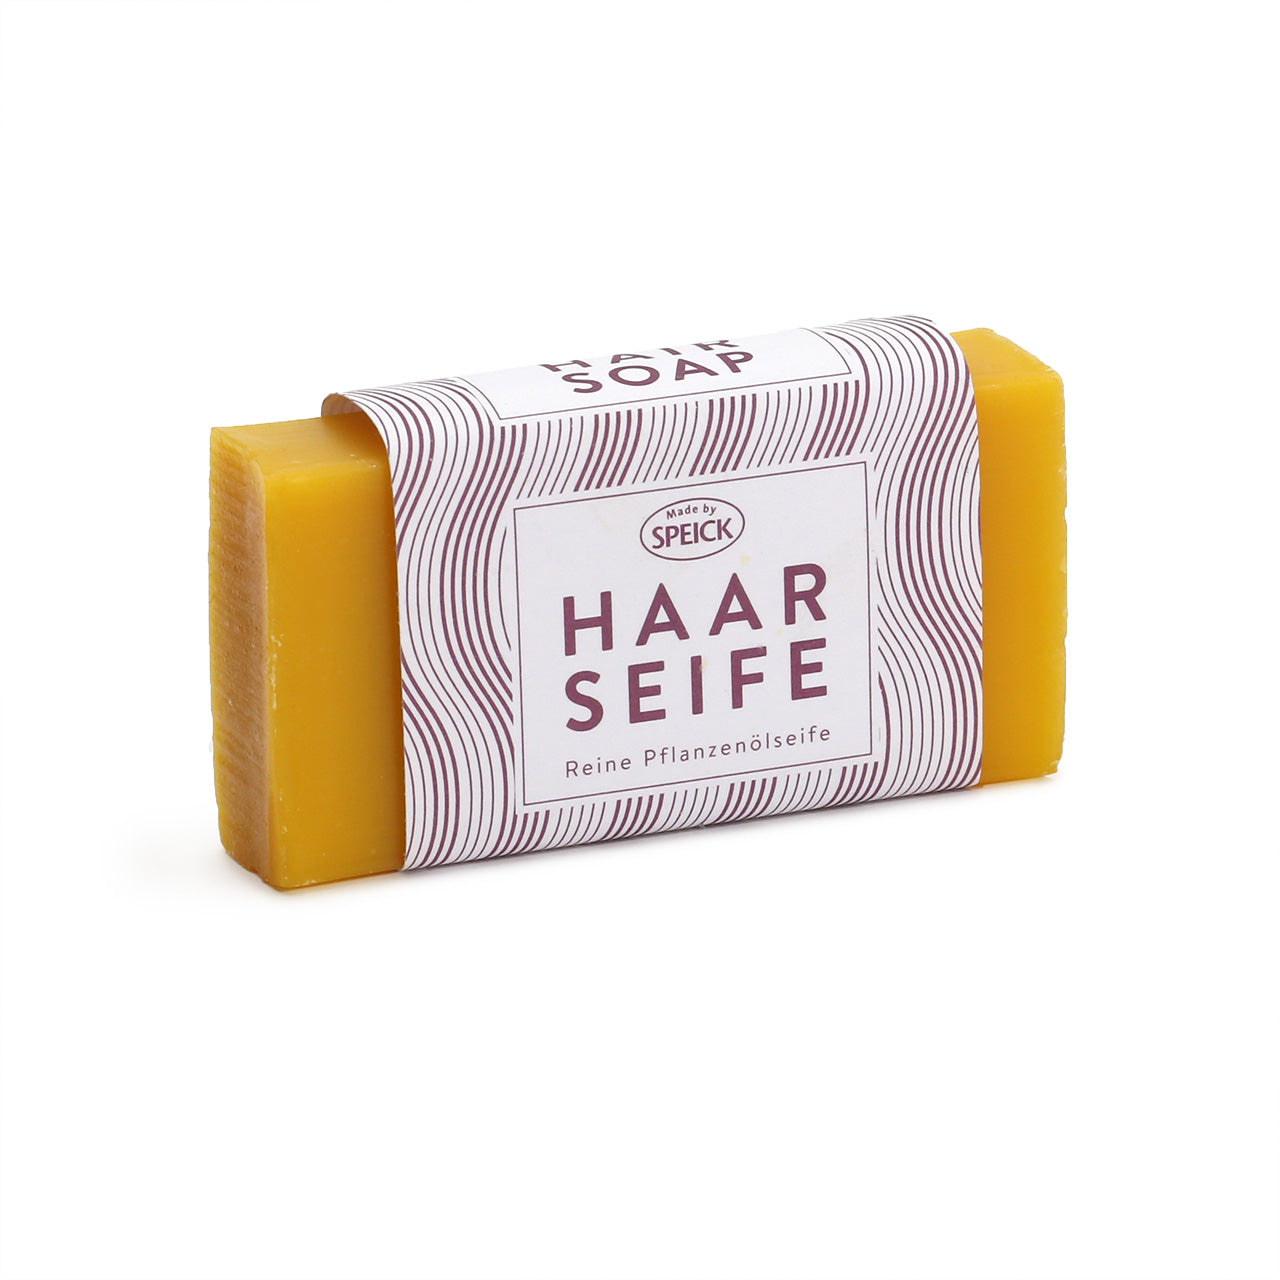 Speick Hair Soap (Haar Seif) is a rich golden colour in a small solid bar with a claret and white coloured paper wrap